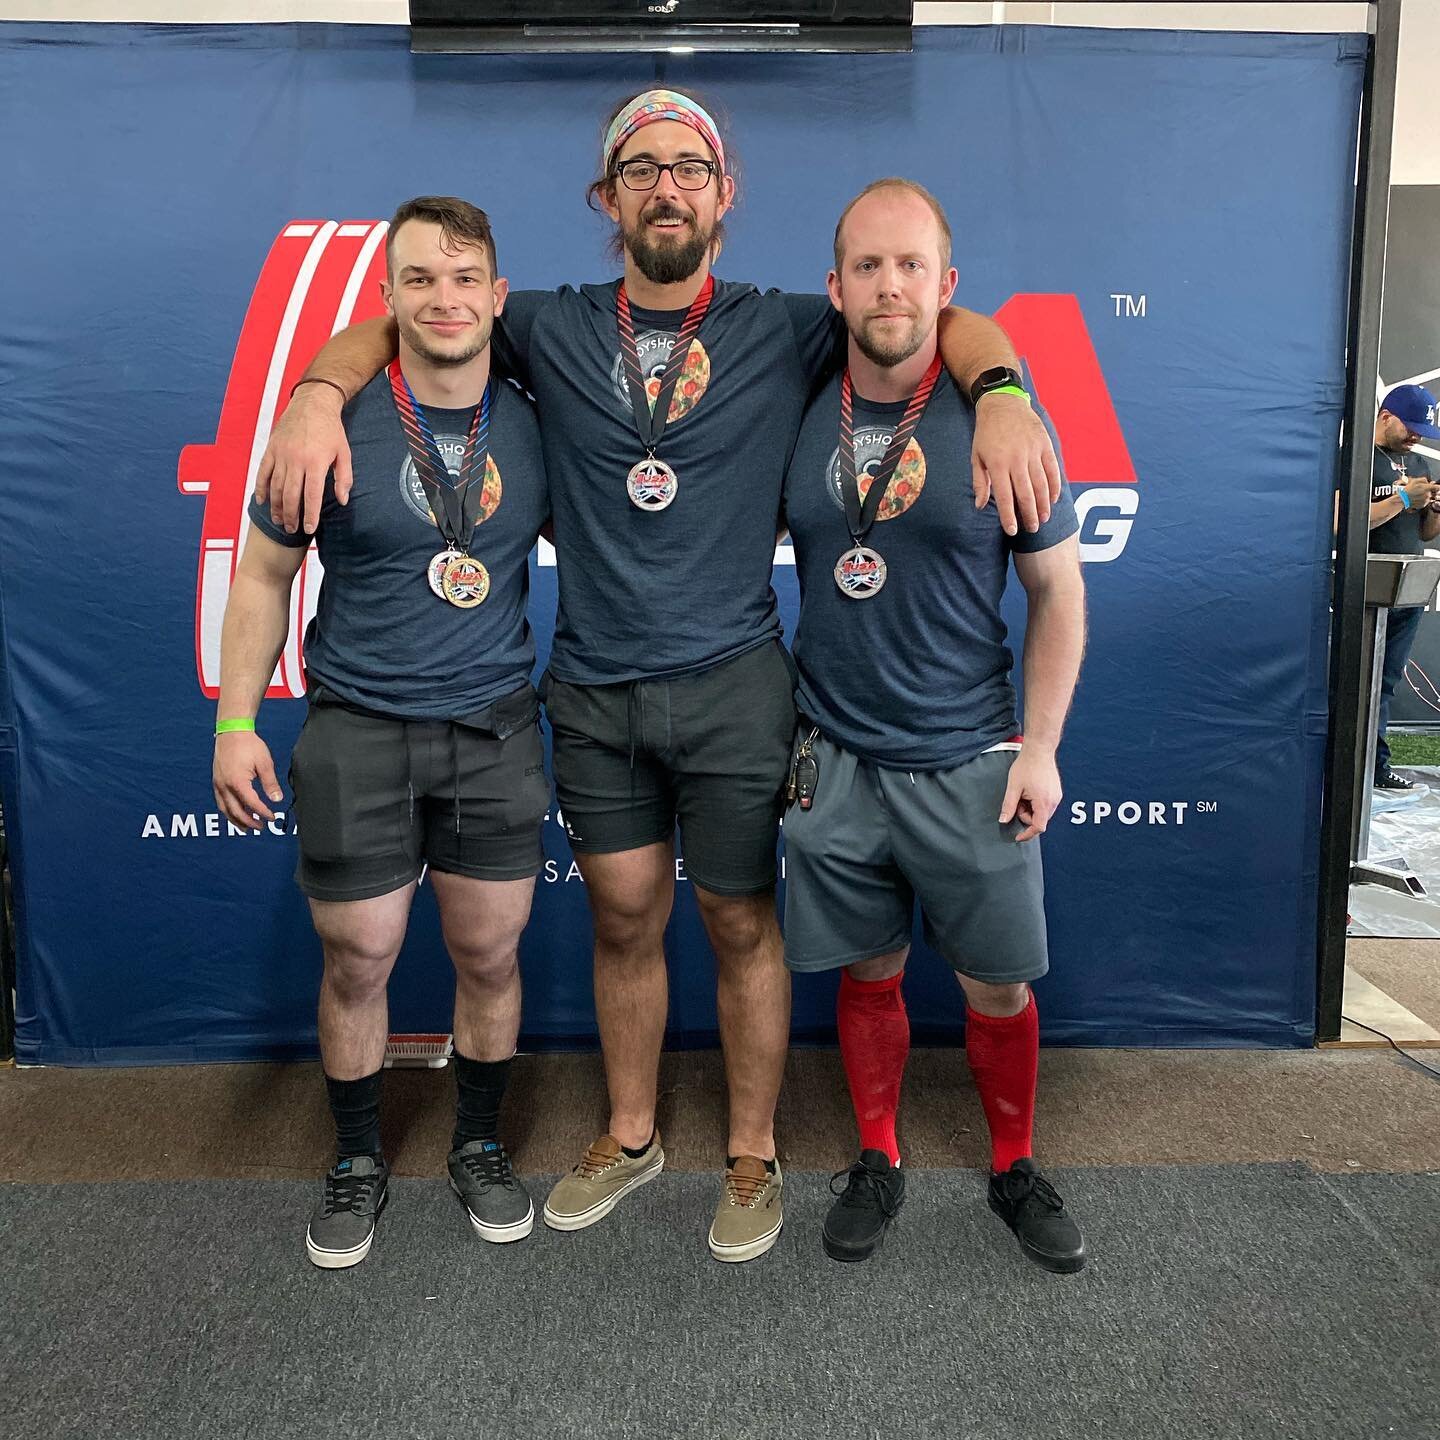 Great meet with the boys this past Sunday. Met a lot of great people. Thanks to the @firehouseabilene clients and friends and online client and friends for coming out. Had a lot of love and support out there. We all placed, and set some PRs. I ended 